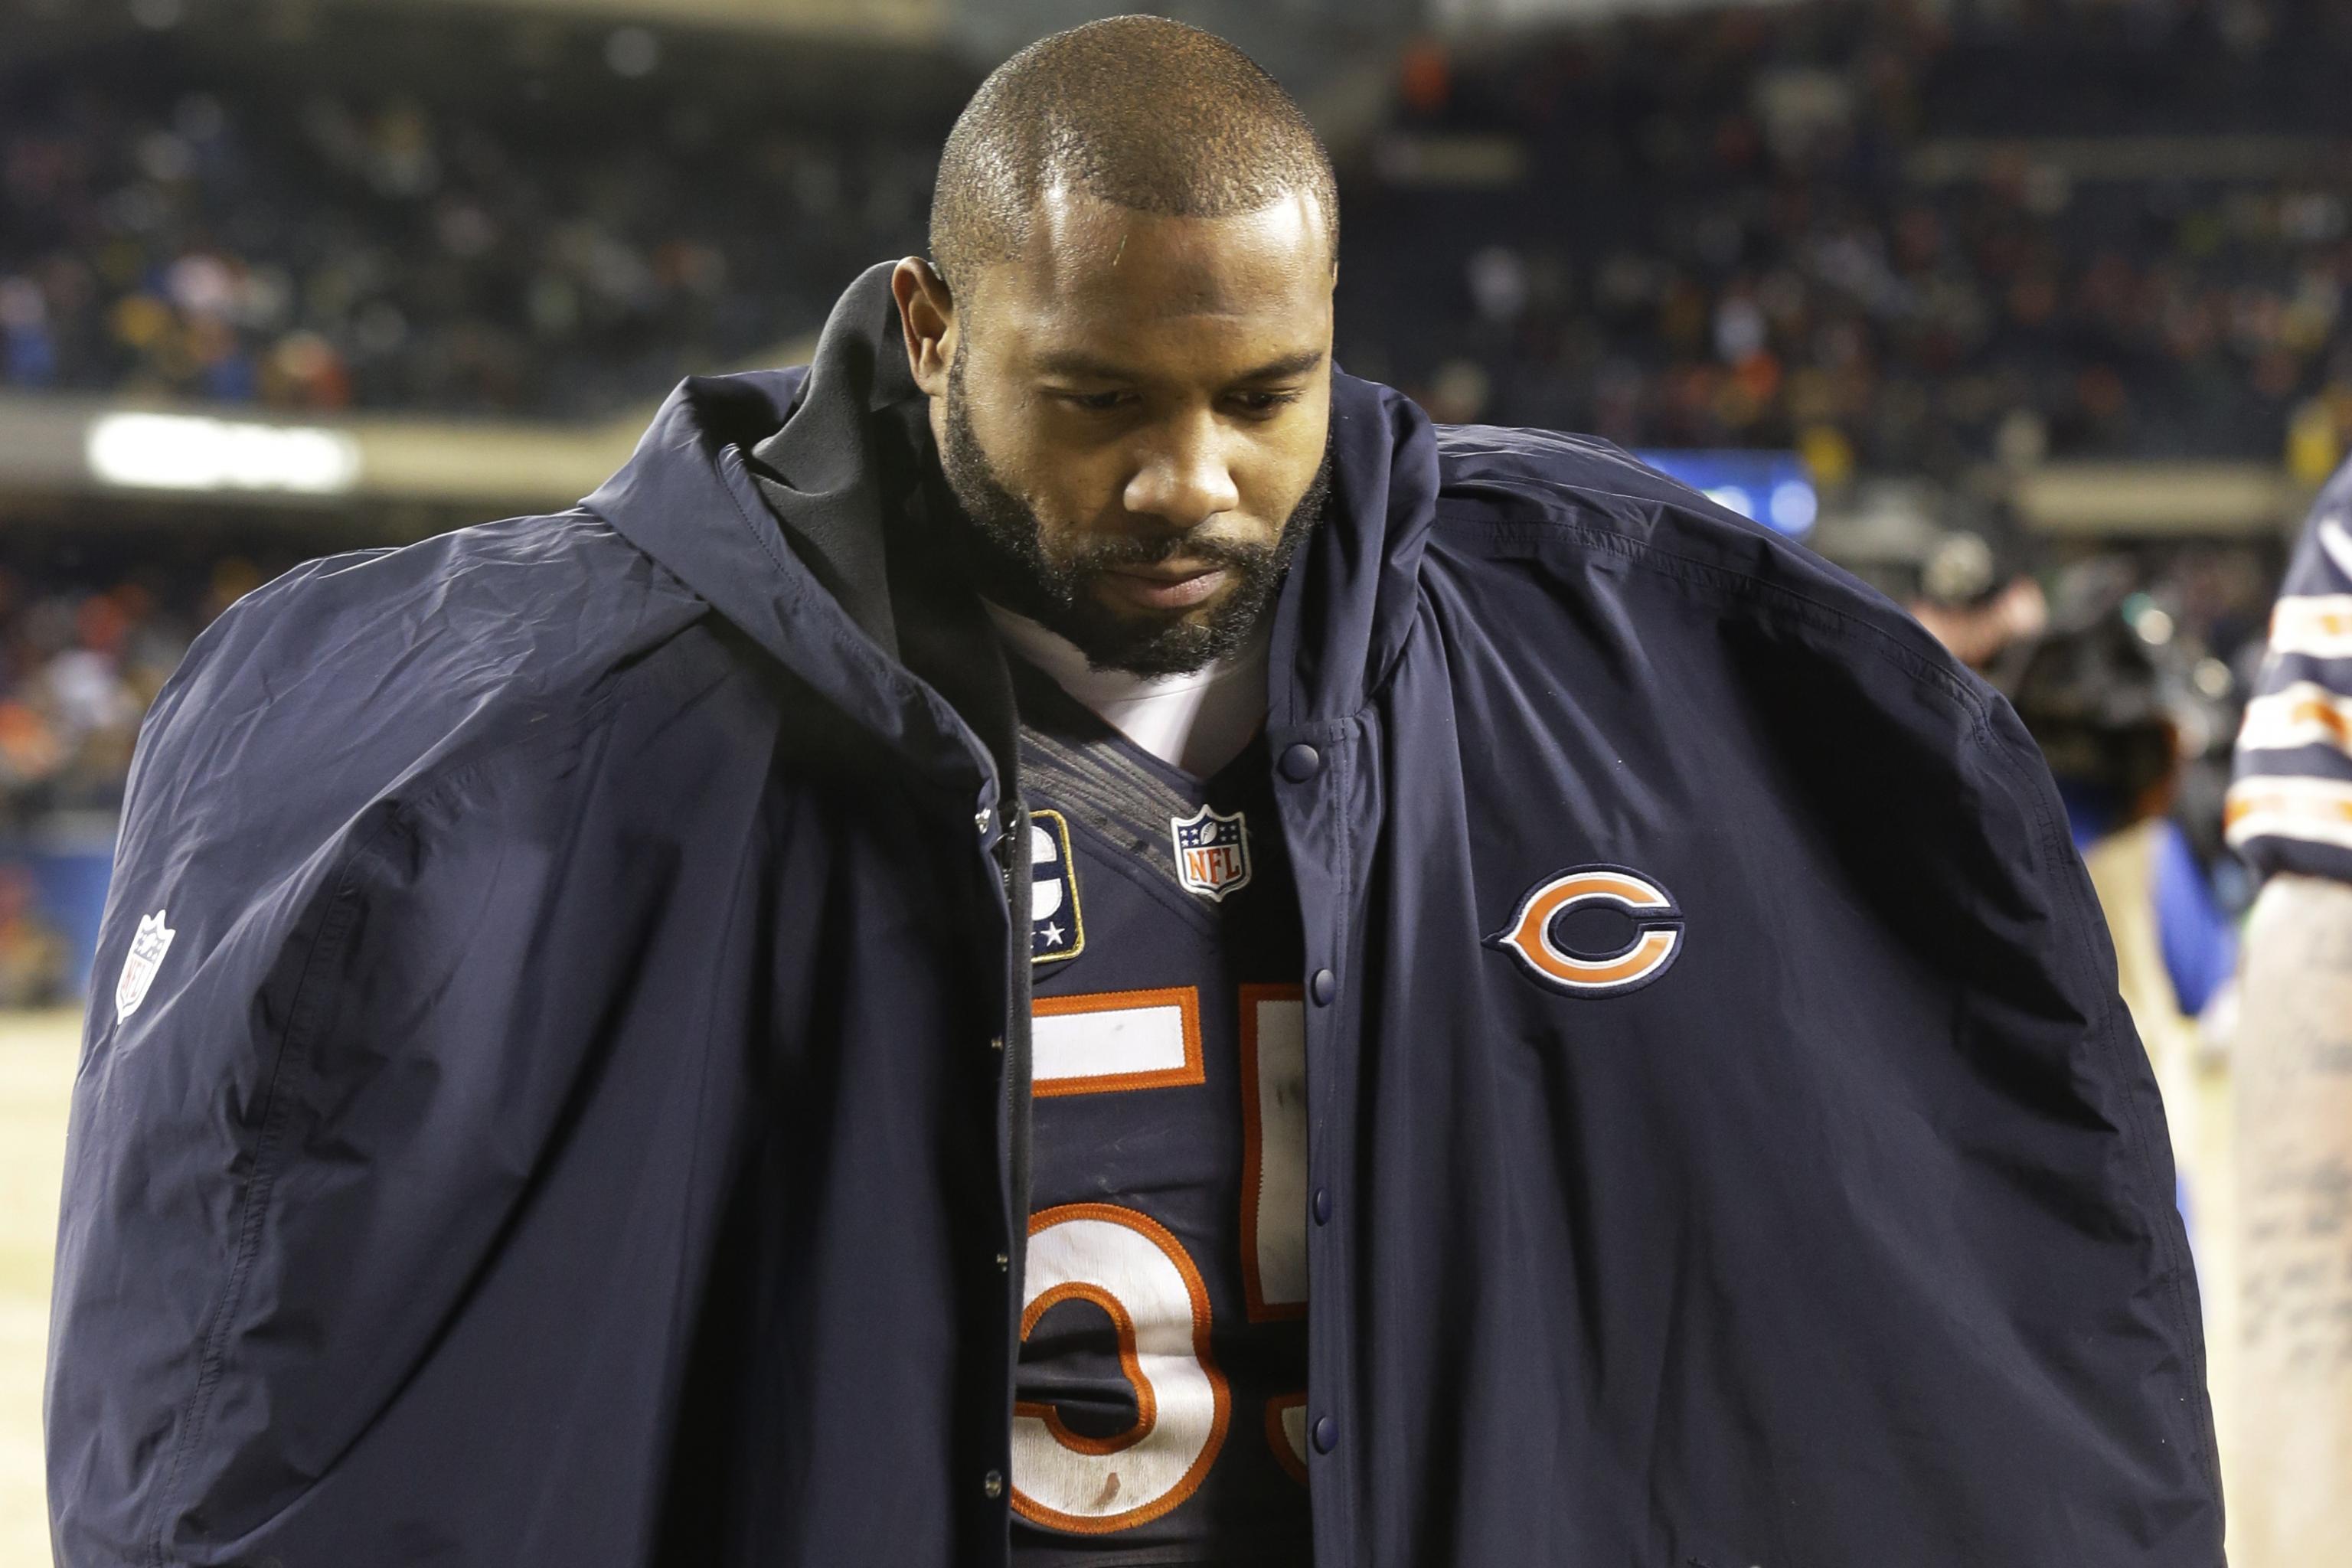 Lance Briggs Denies He's Retired, Will Make Decision on Career in